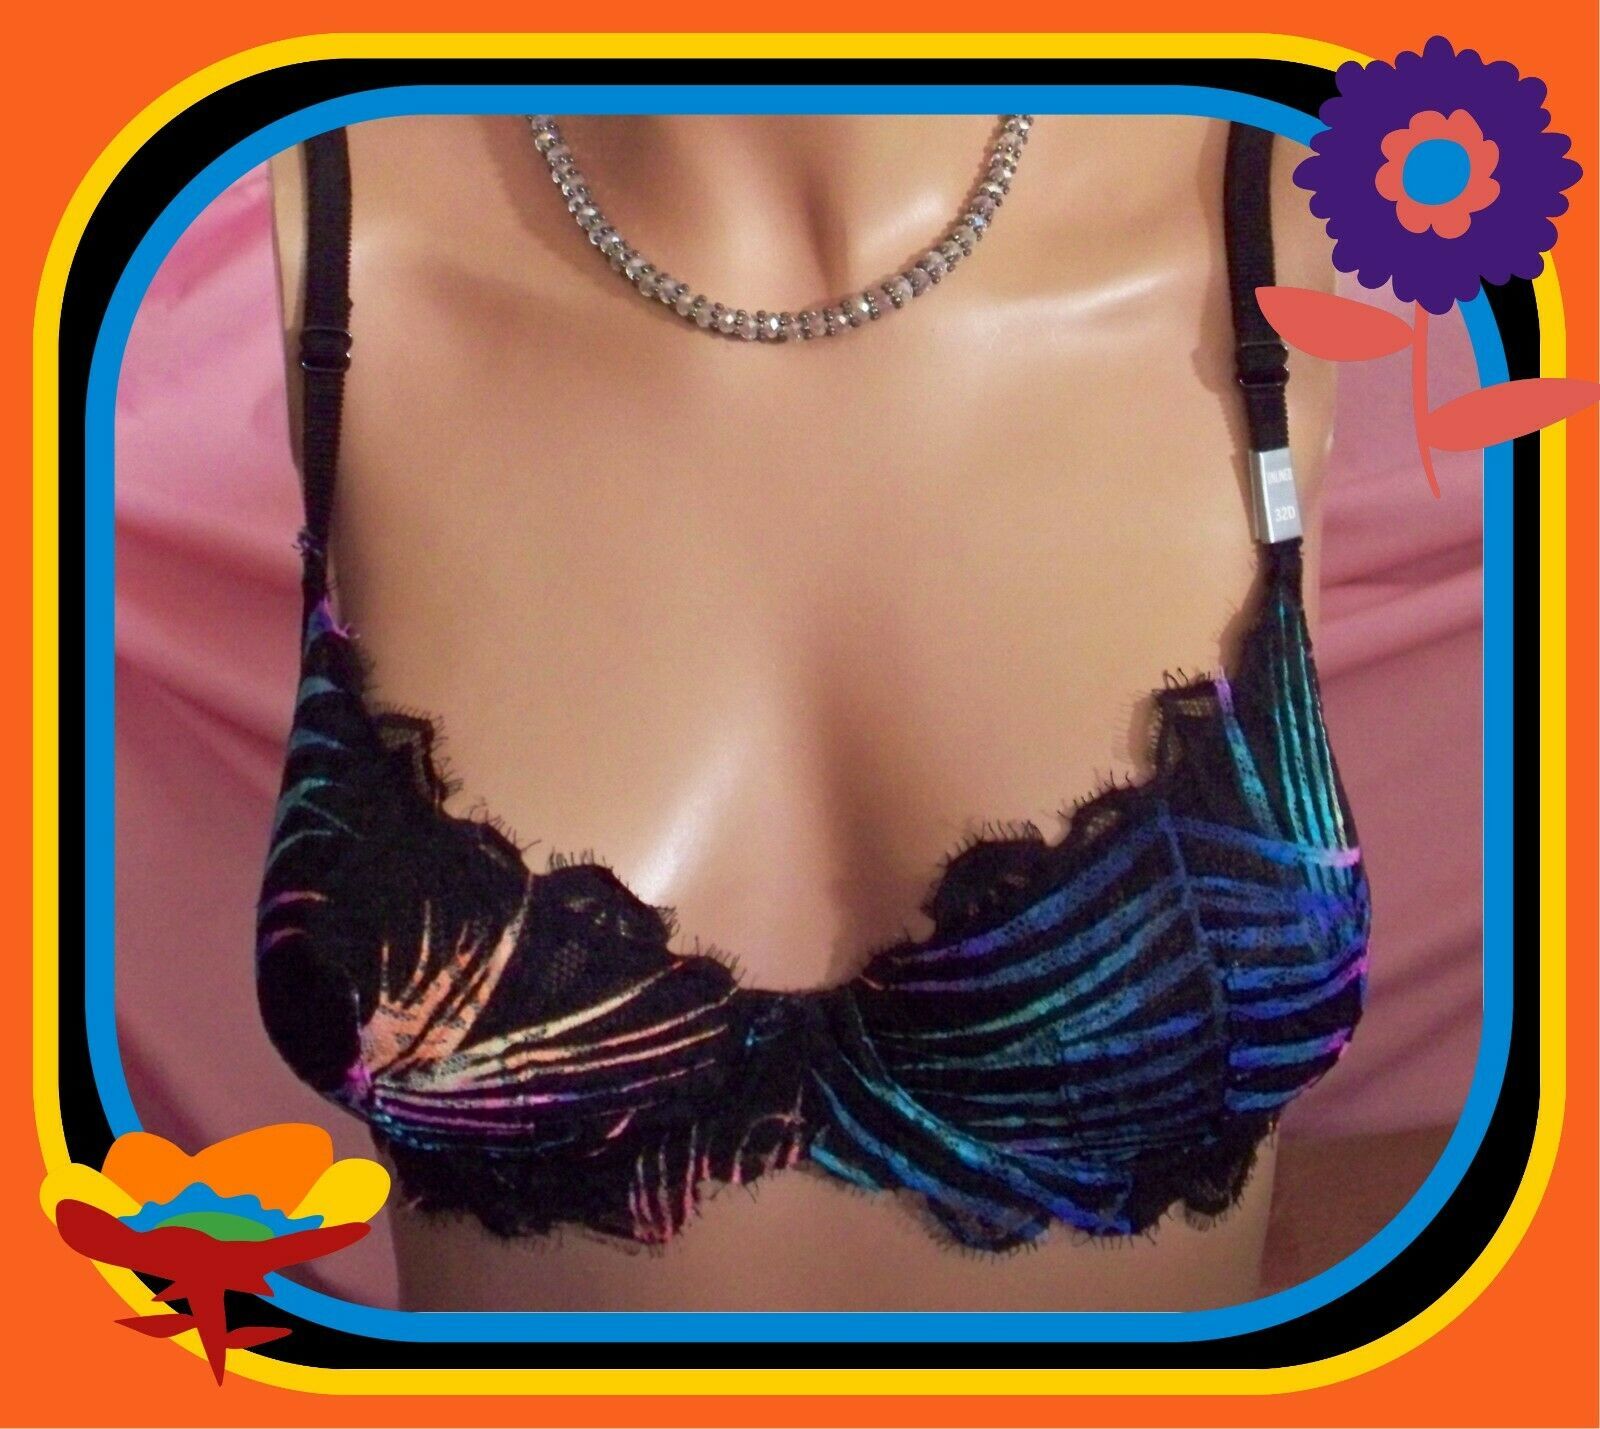 32C Black Wild Rainbow Lace Date Victorias and 50 similar items